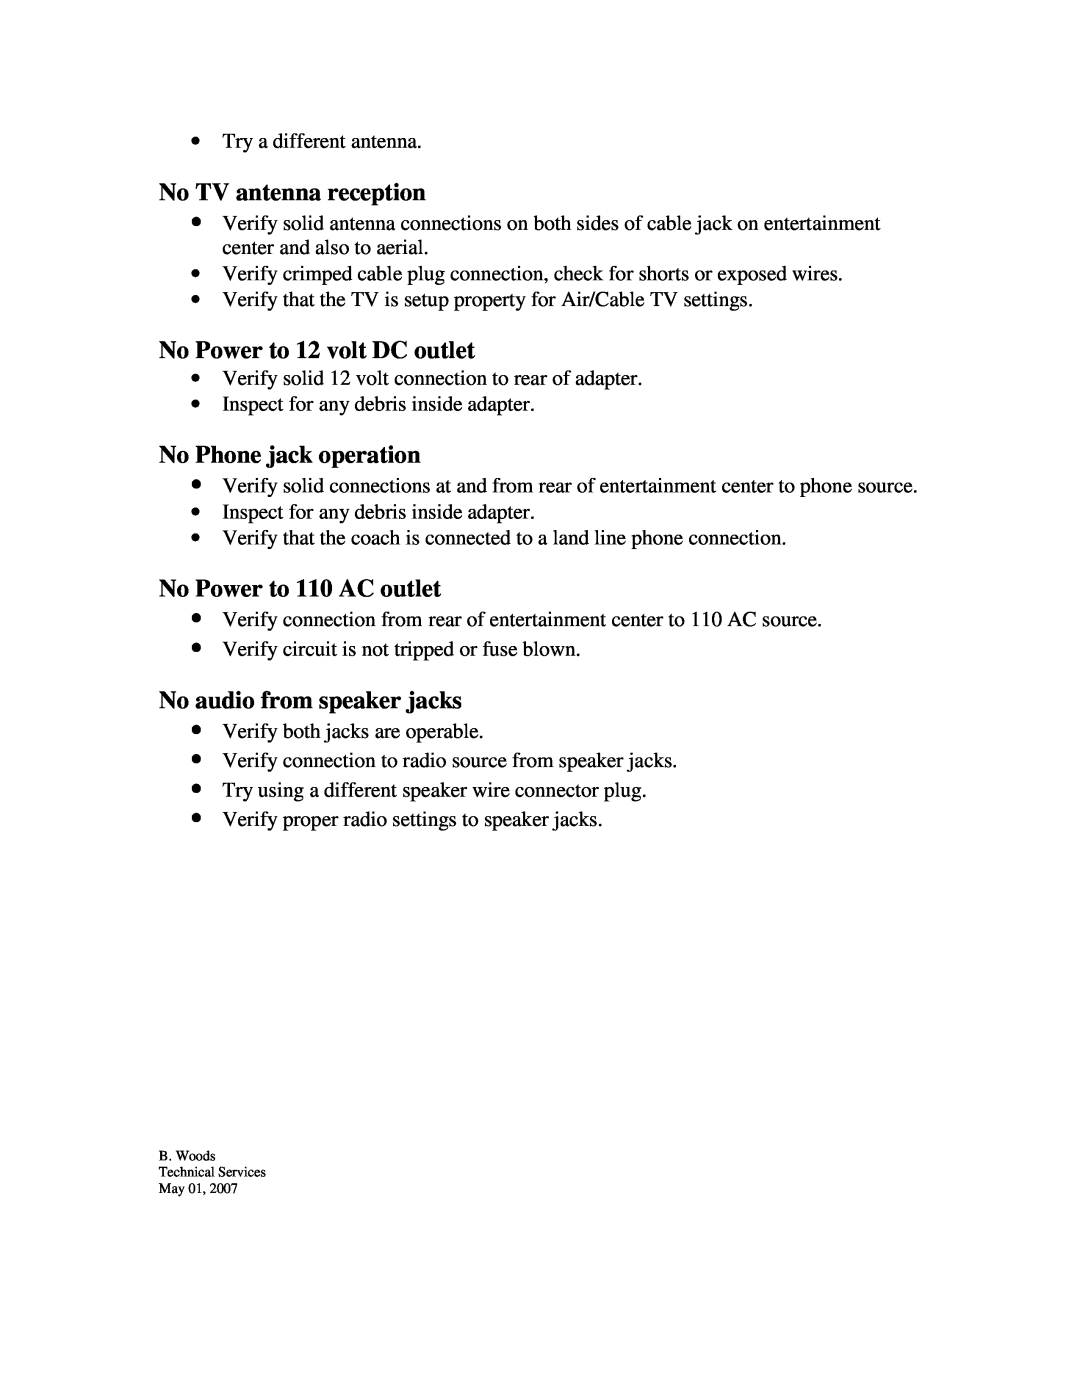 ASA Electronics OEC1550 owner manual No TV antenna reception, No Power to 12 volt DC outlet, No Phone jack operation 